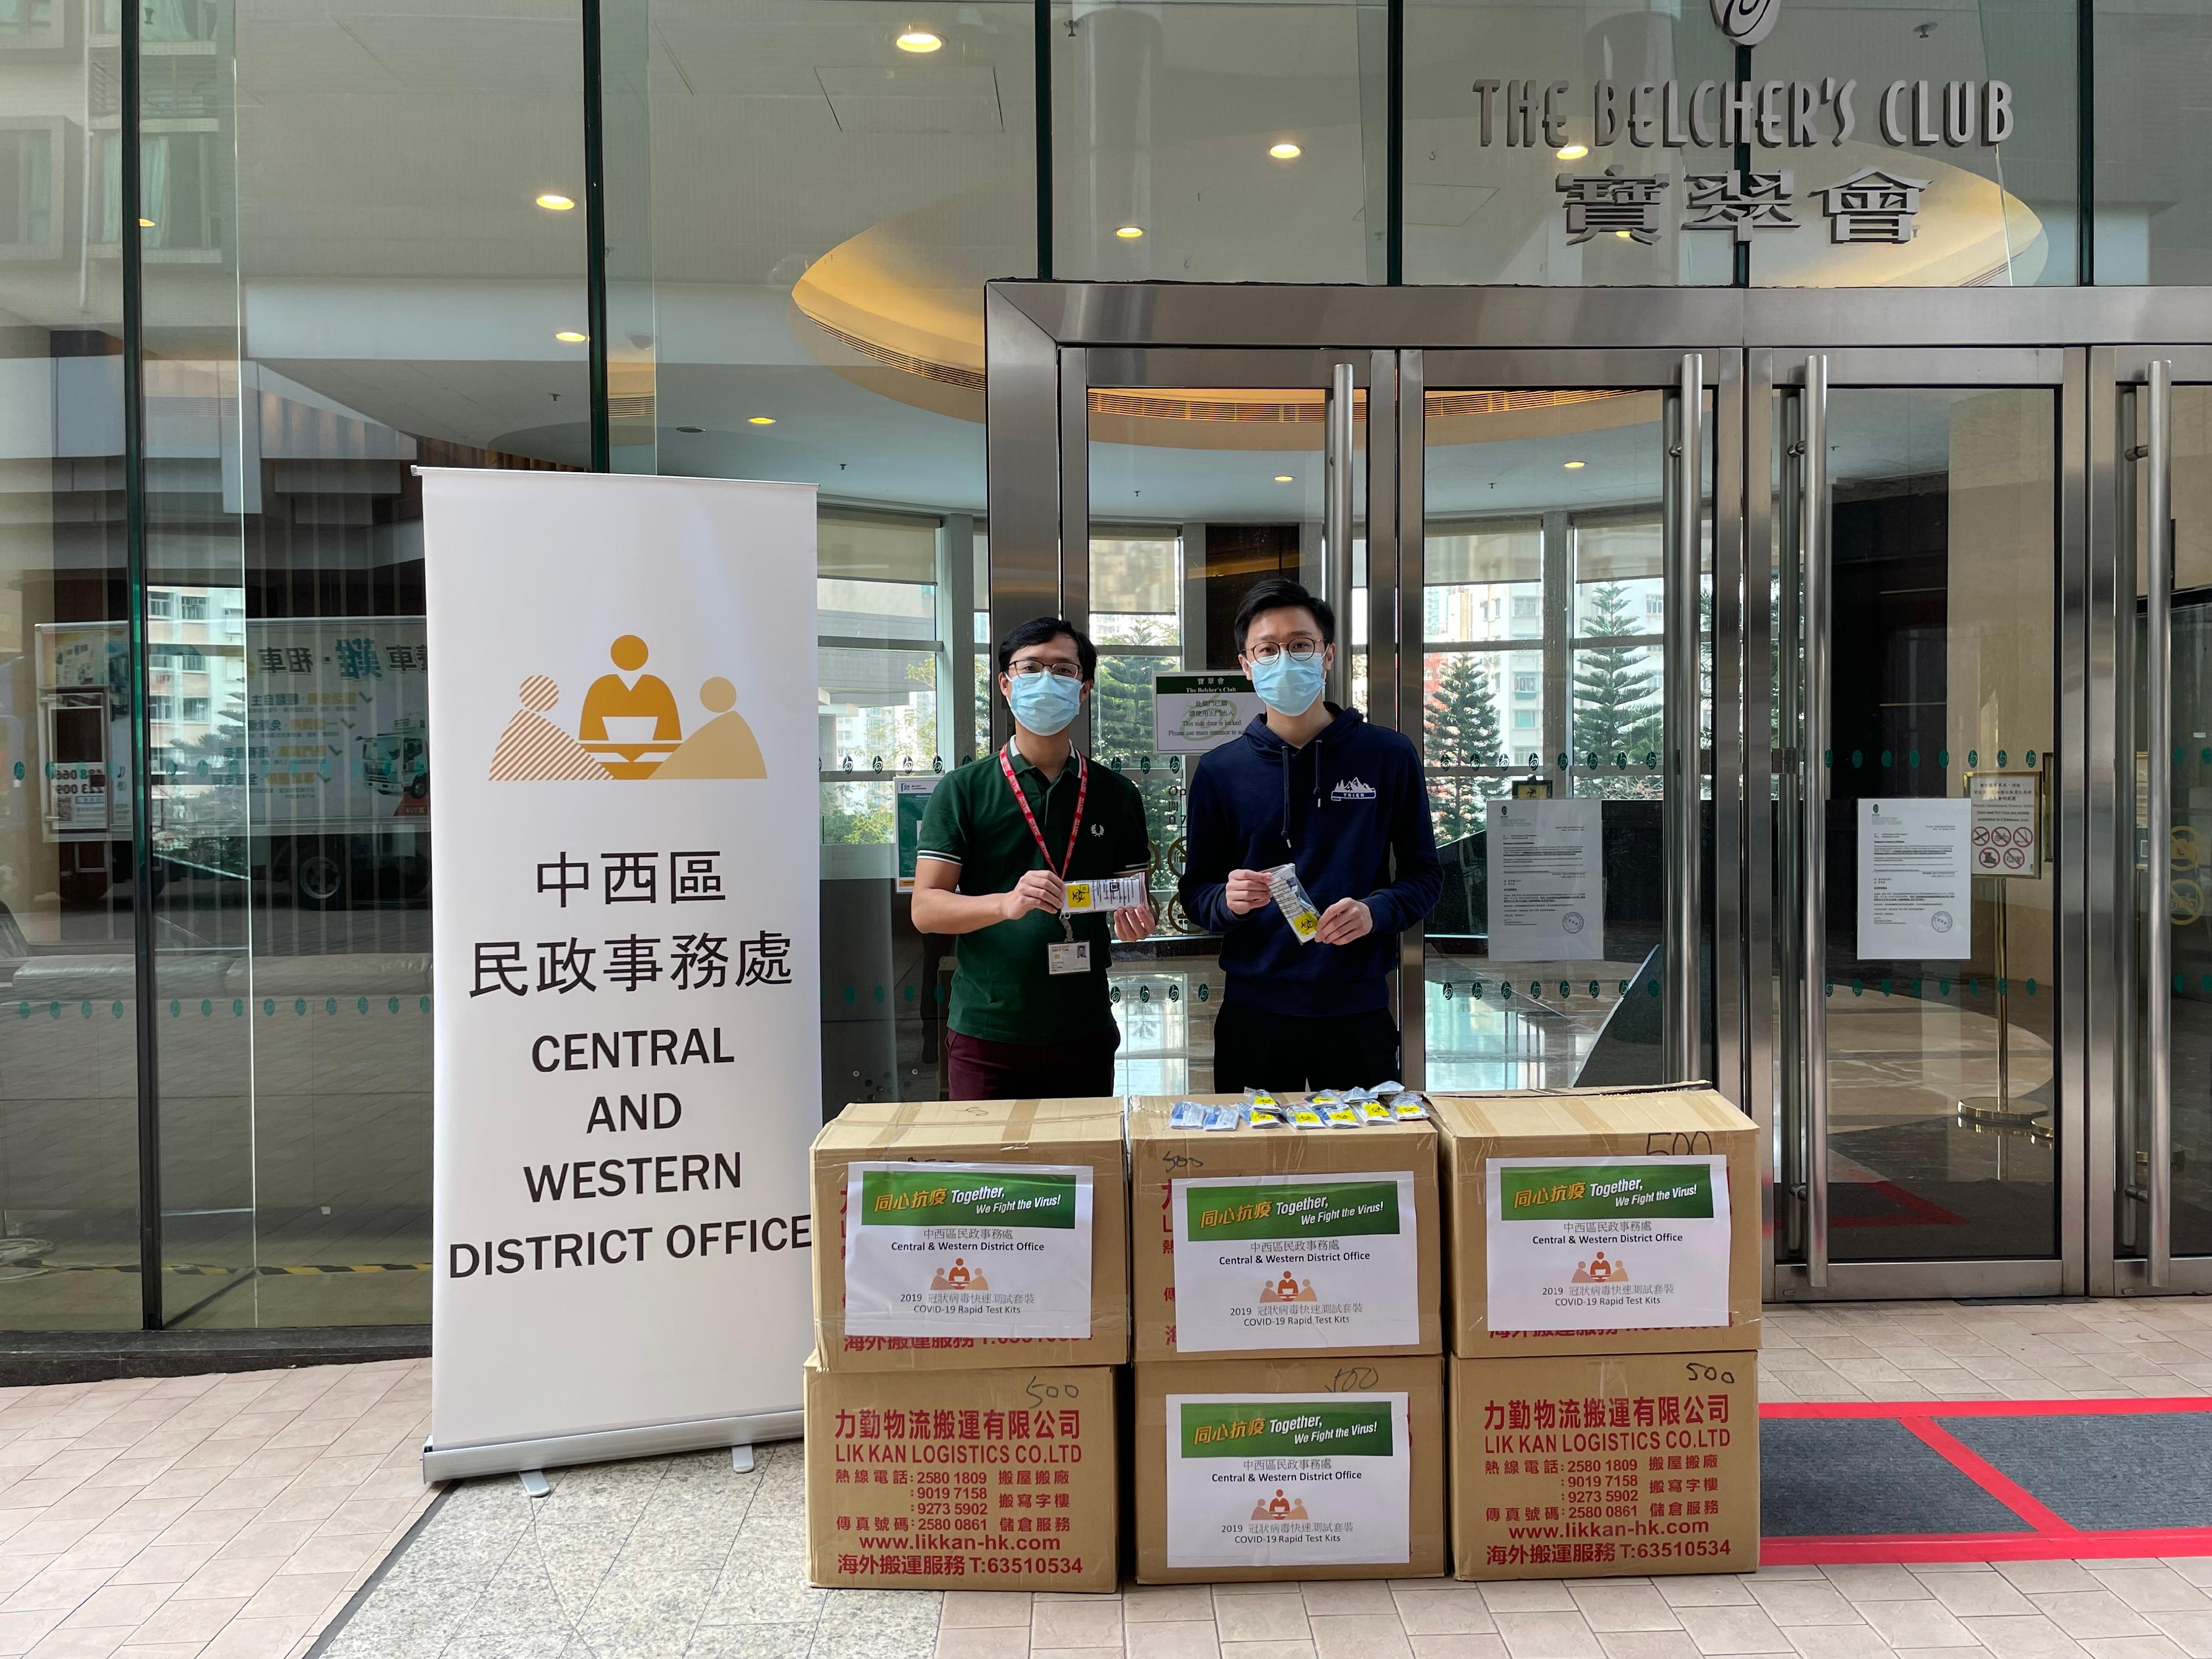 The Central and Western District Office today (March 5) distributed COVID-19 rapid test kits to households, cleansing workers and property management staff living and working in the Belcher's for voluntary testing through the property management company.